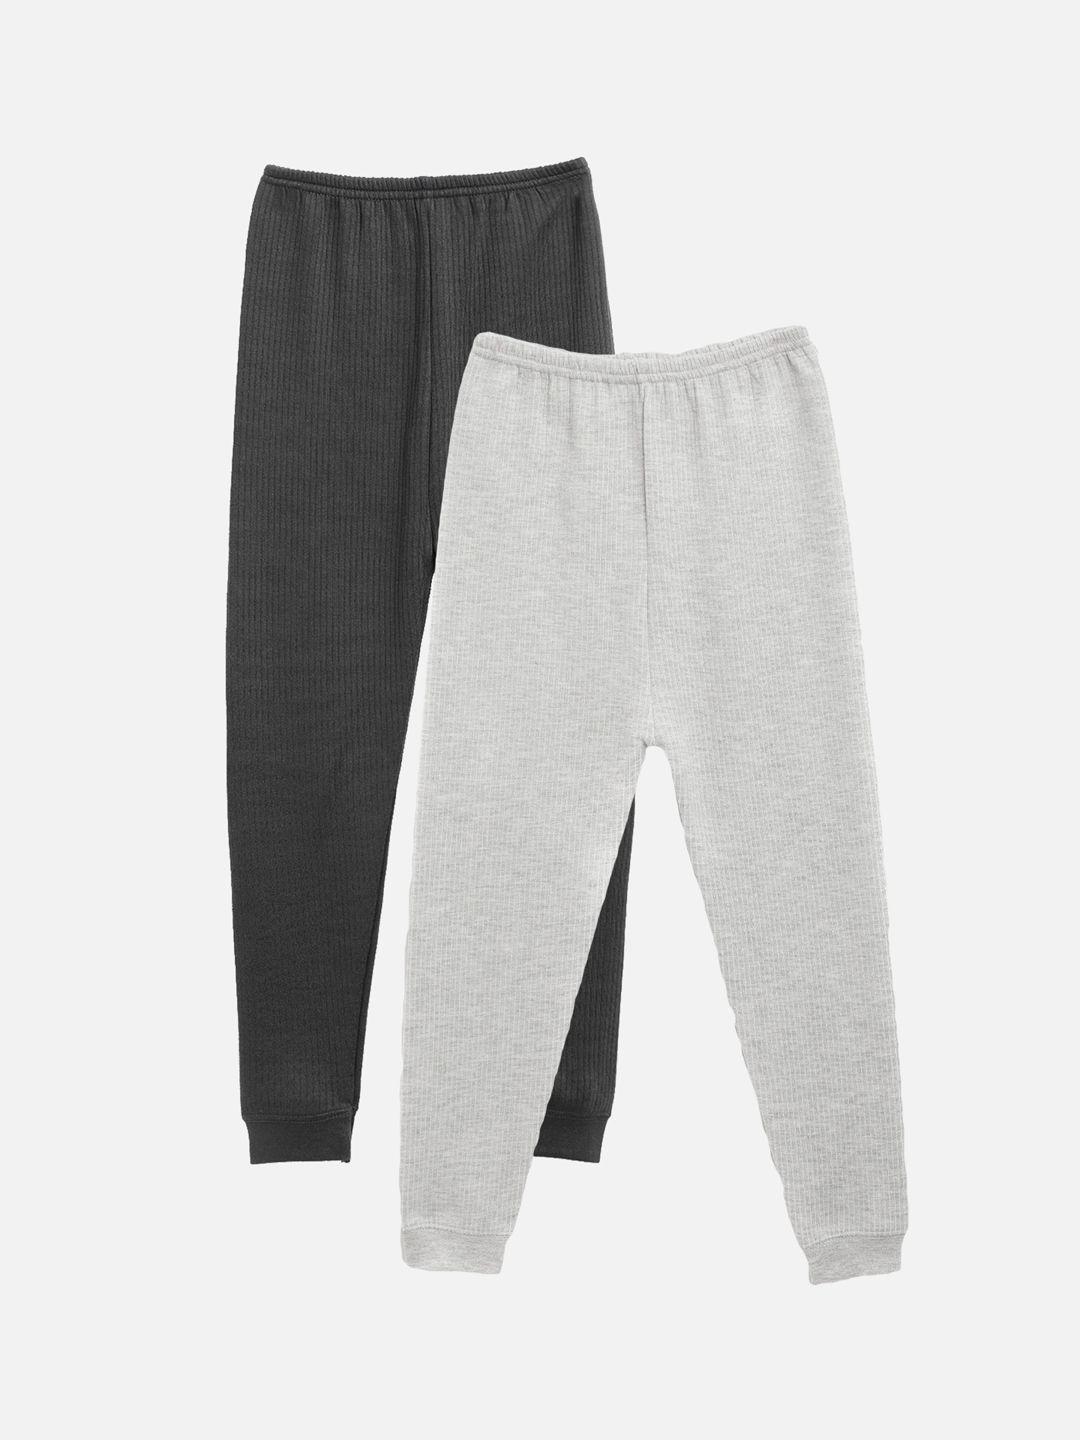 kanvin boys pack of 2 charcoal & grey solid thermal bottoms